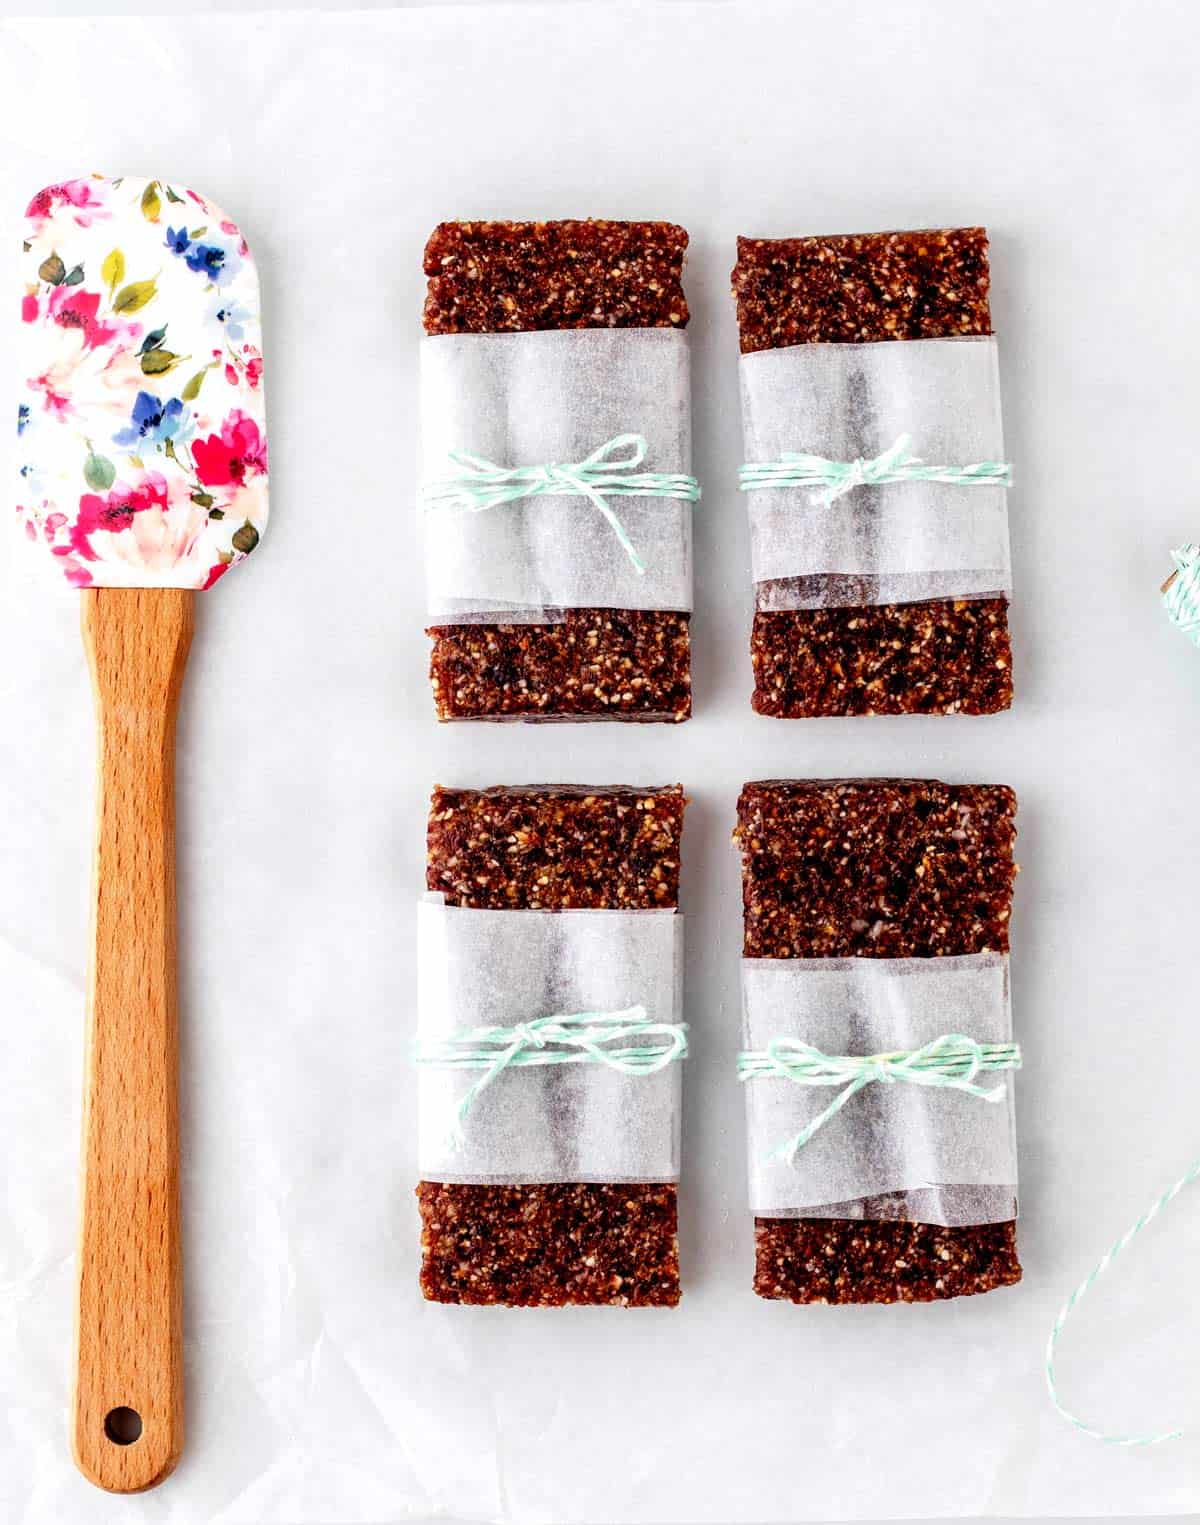 Four homemade pressed fruit bars wrapped in parchment paper and string.